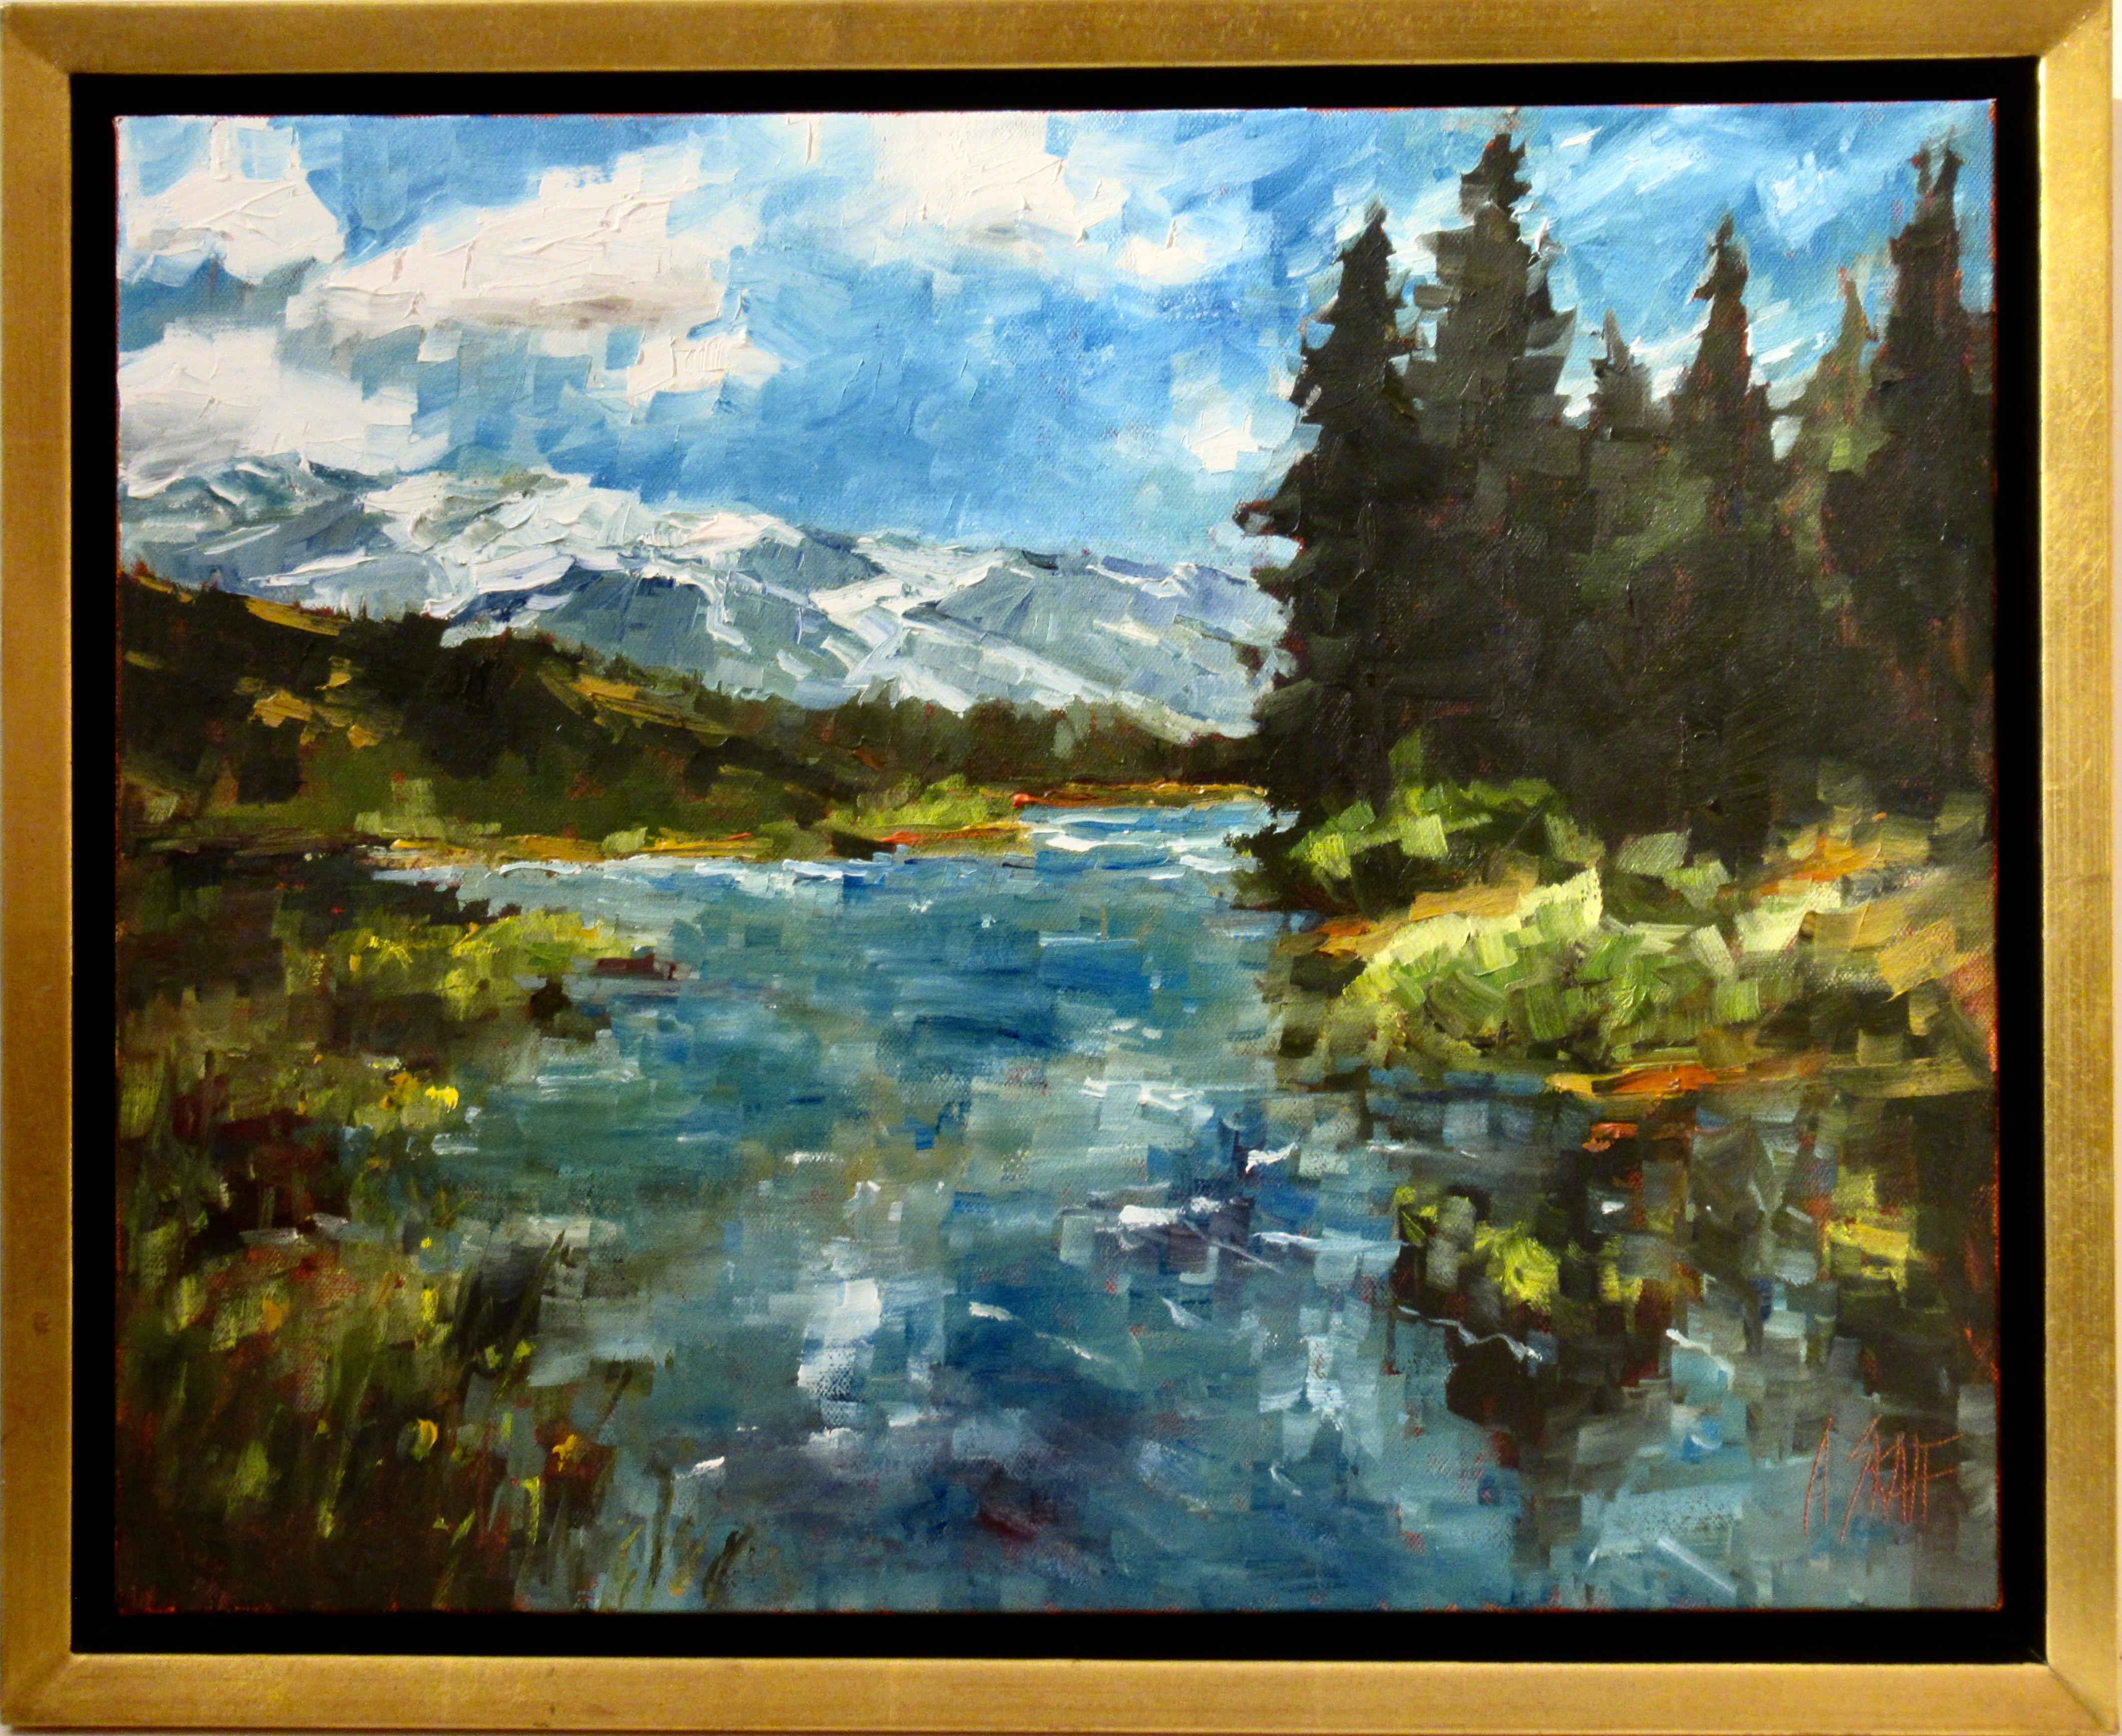 Andrew (Andy) Skaff Figurative Painting - Spring Flow on the Little Truckee